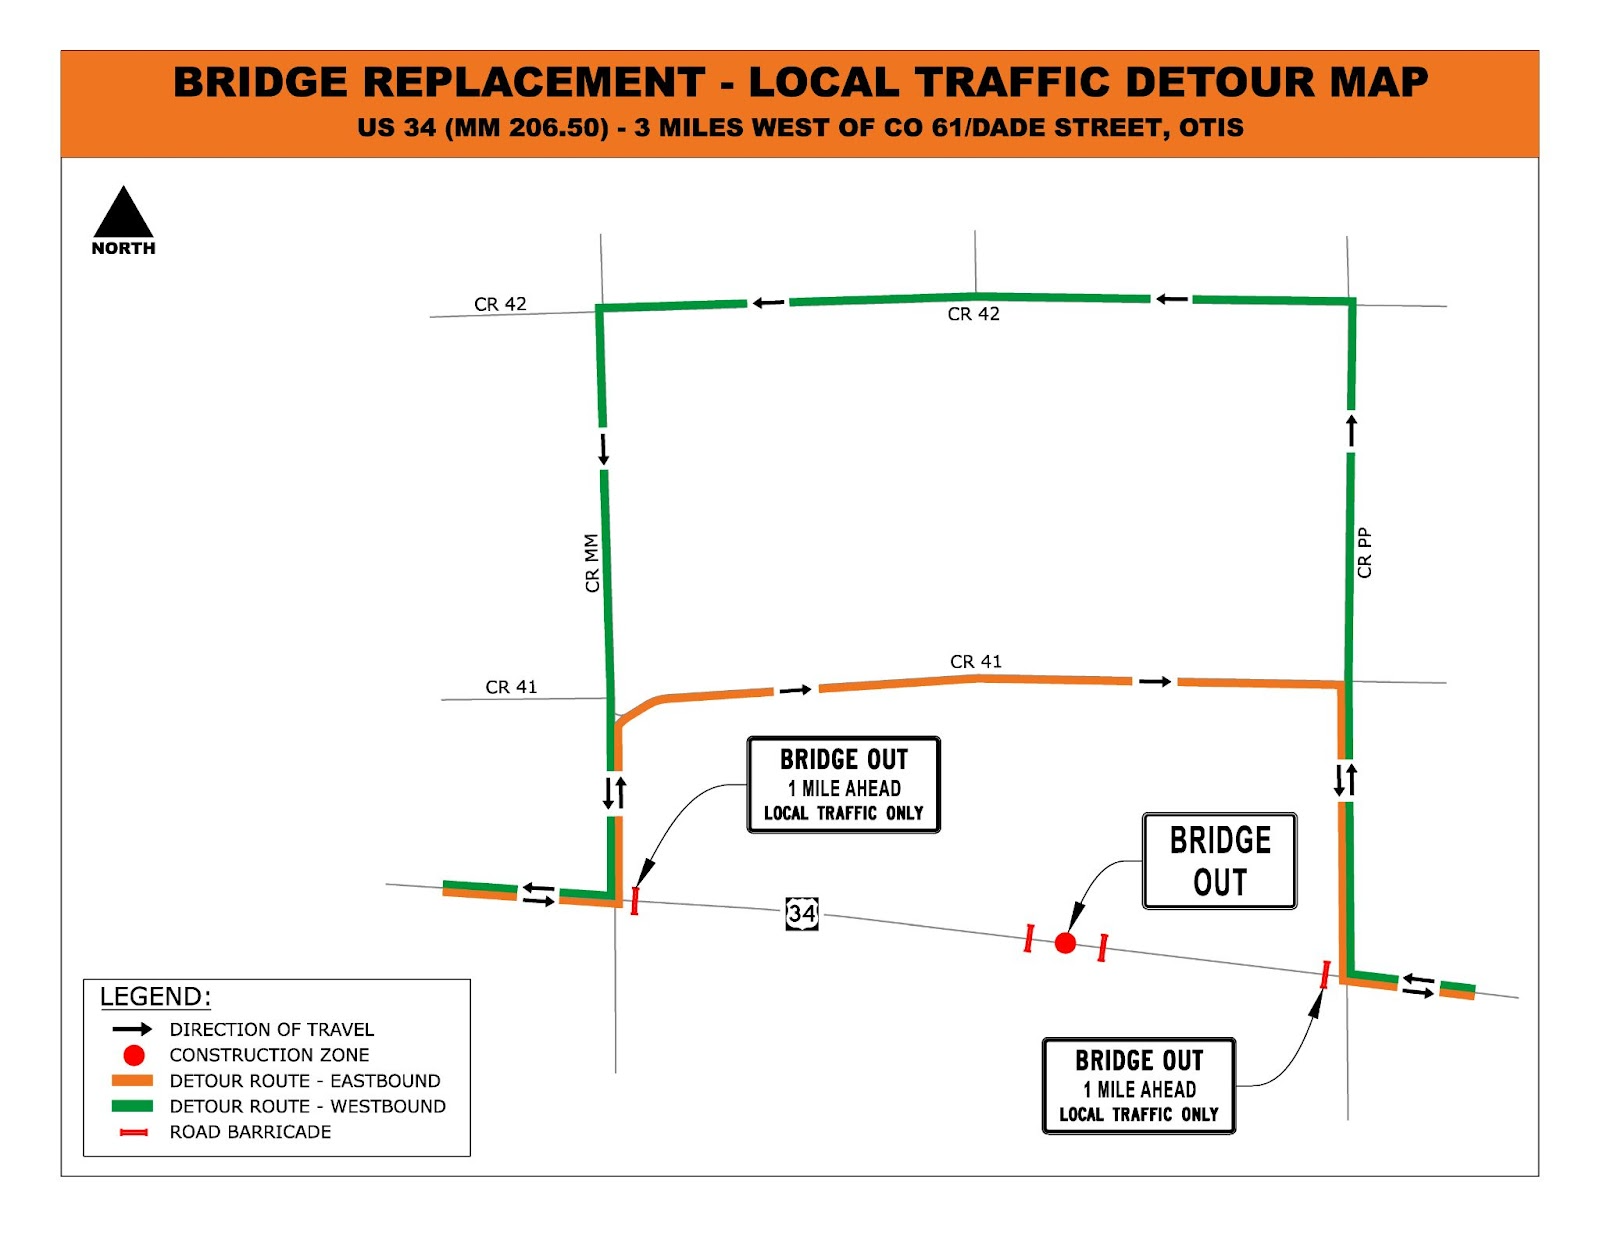 Bridge Replacement Local Traffic Detour Map on US 34 at Mile Point 206 three miles west of CO 61.png detail image